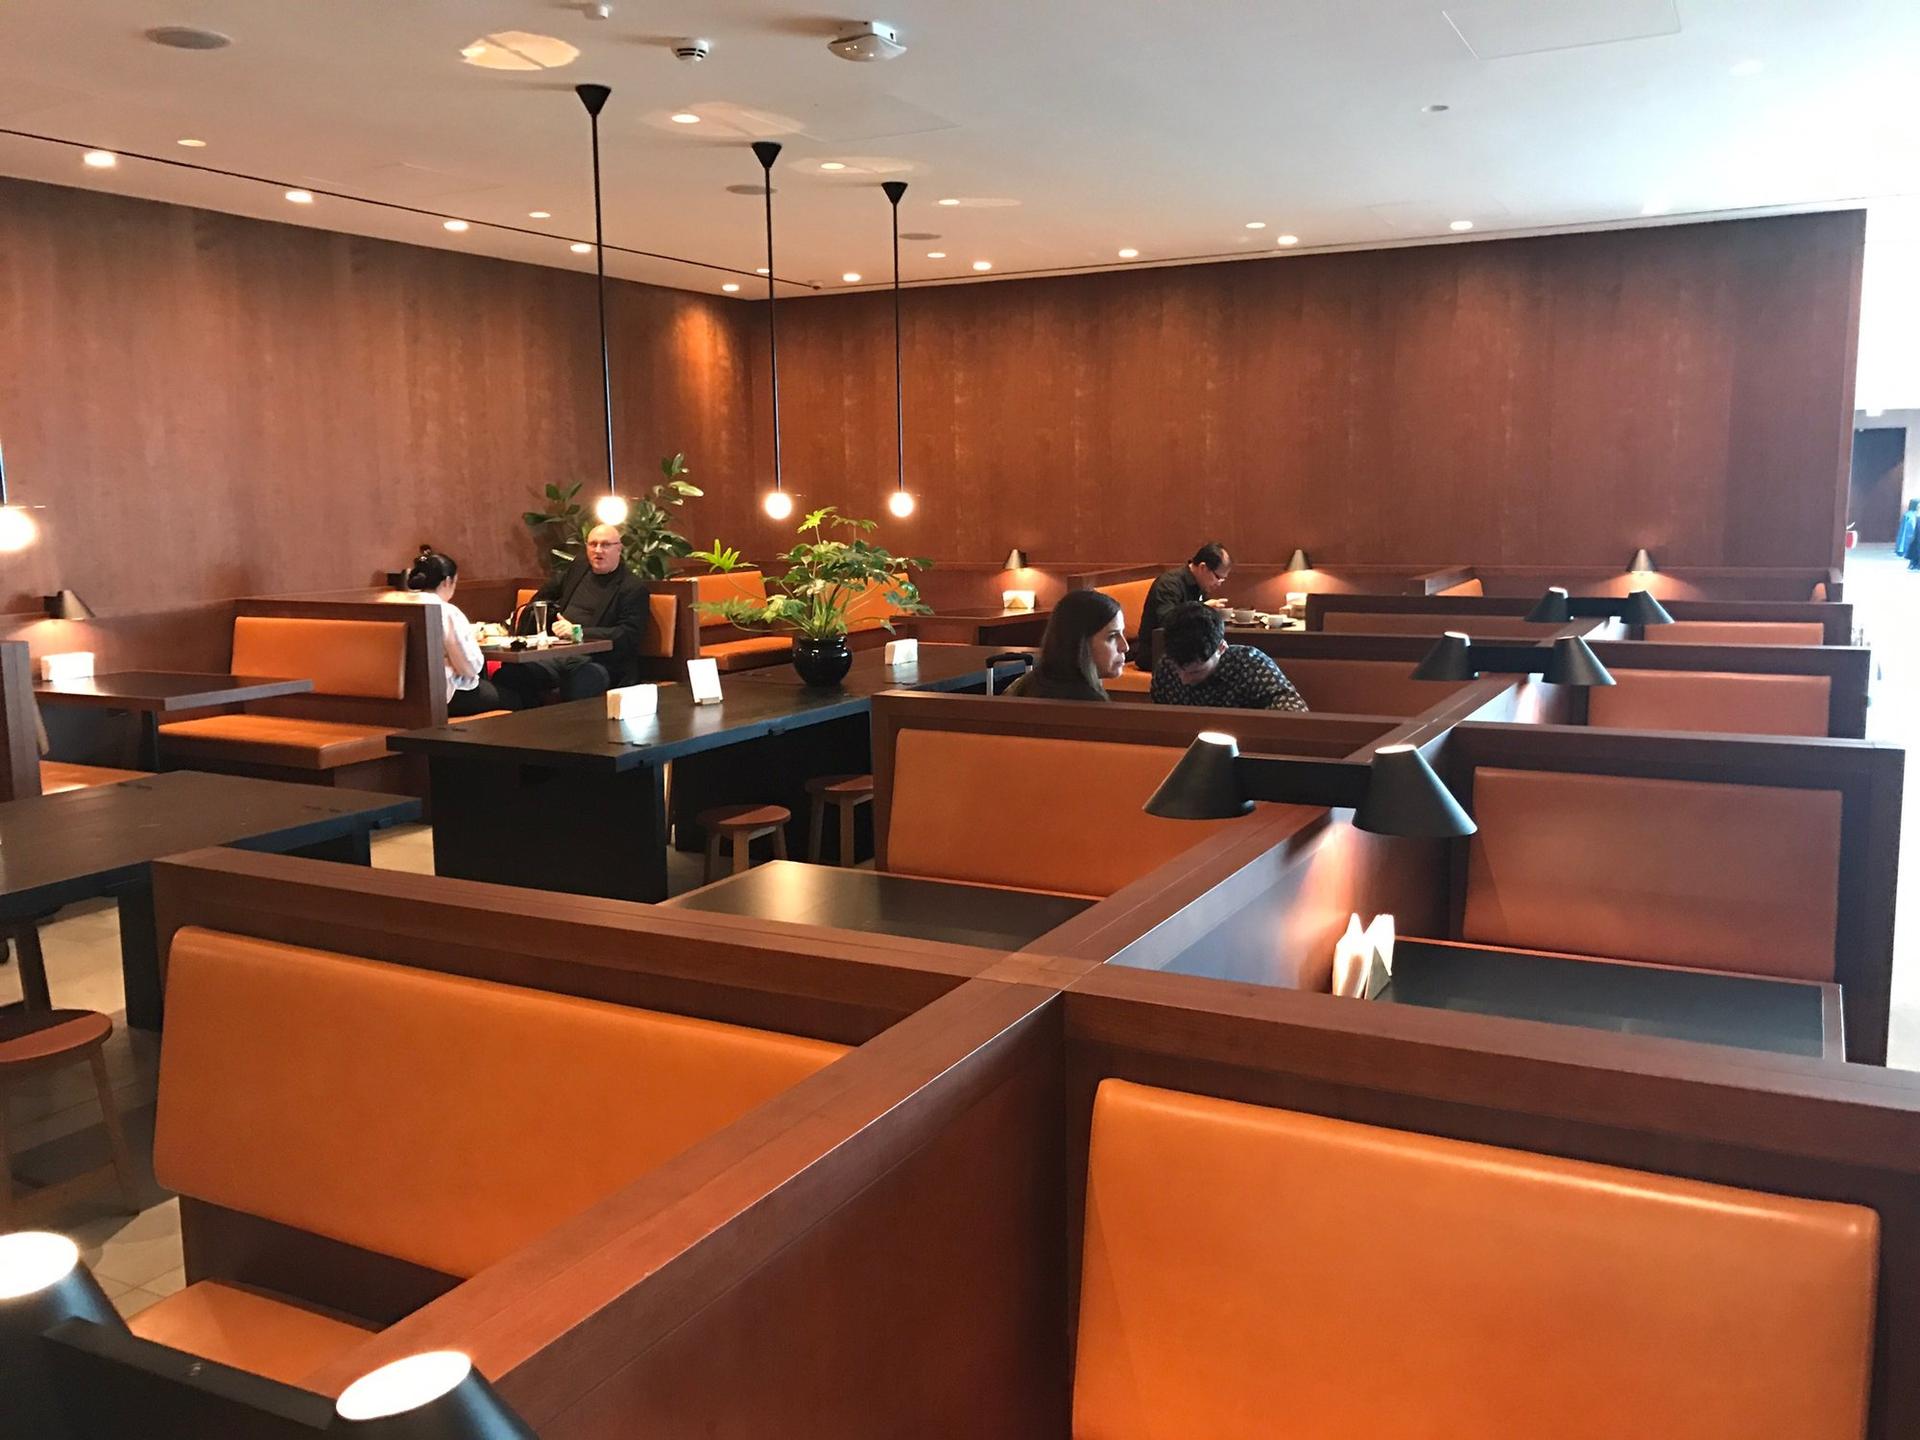 Cathay Pacific Business Class Lounge image 19 of 48